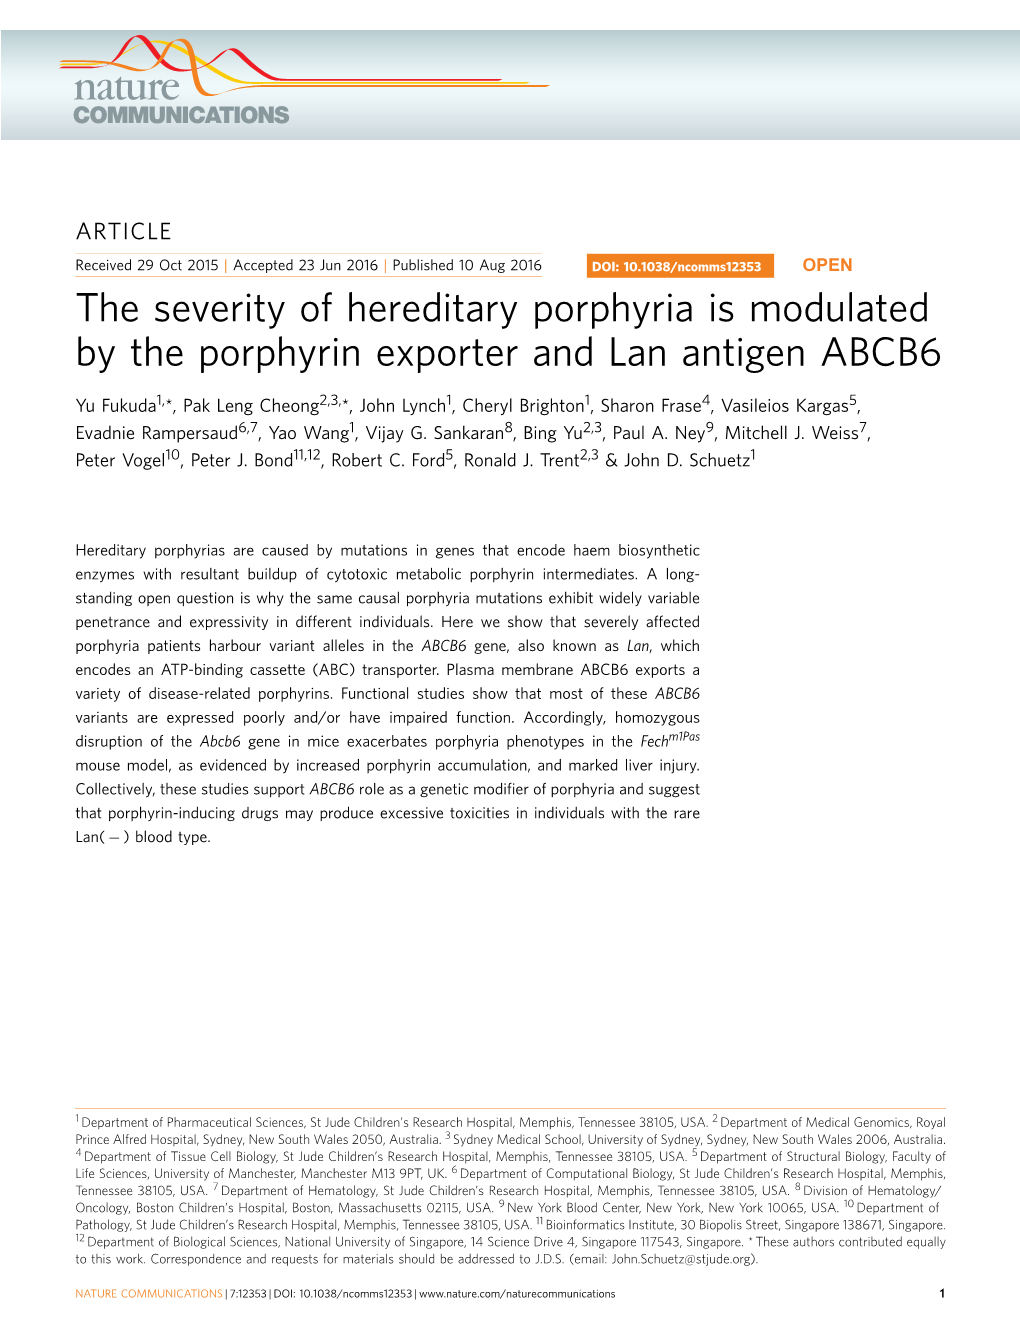 The Severity of Hereditary Porphyria Is Modulated by the Porphyrin Exporter and Lan Antigen ABCB6